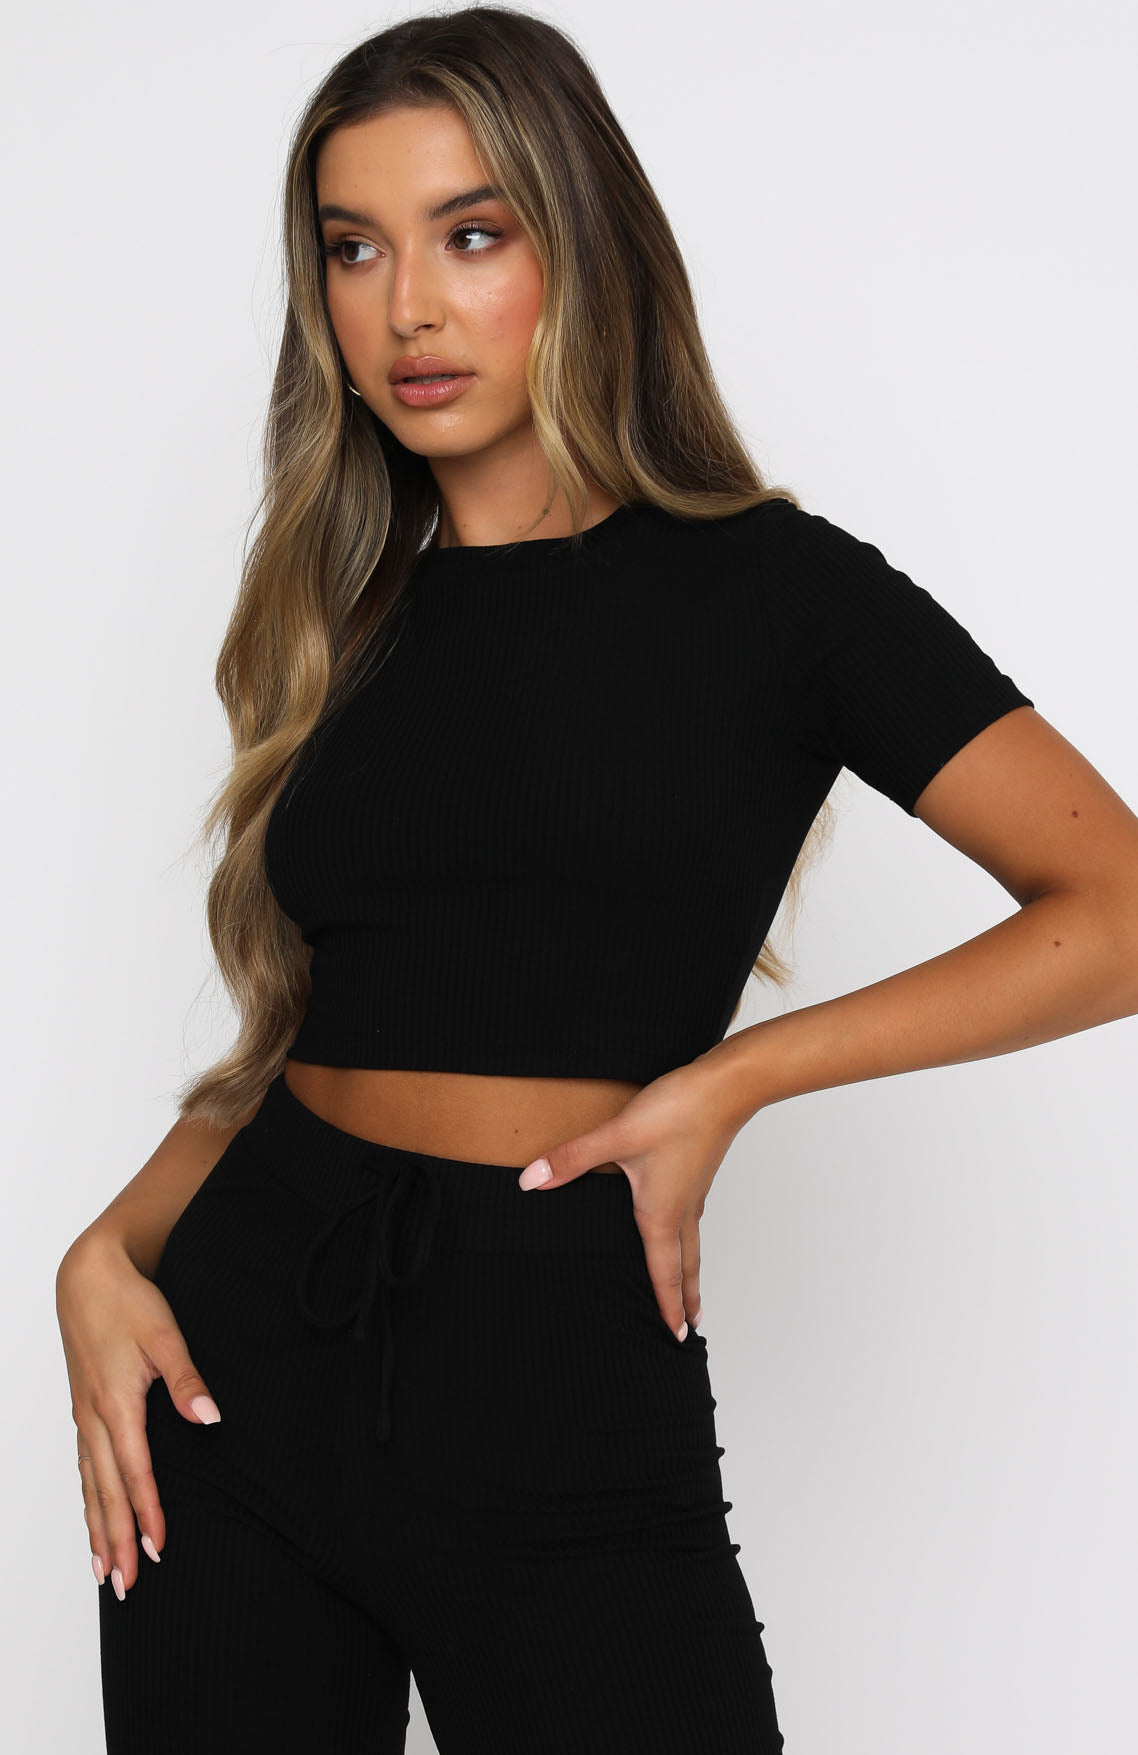 B Free Intimate Apparel - Women's Black Crop Tops - Cotton Pull On